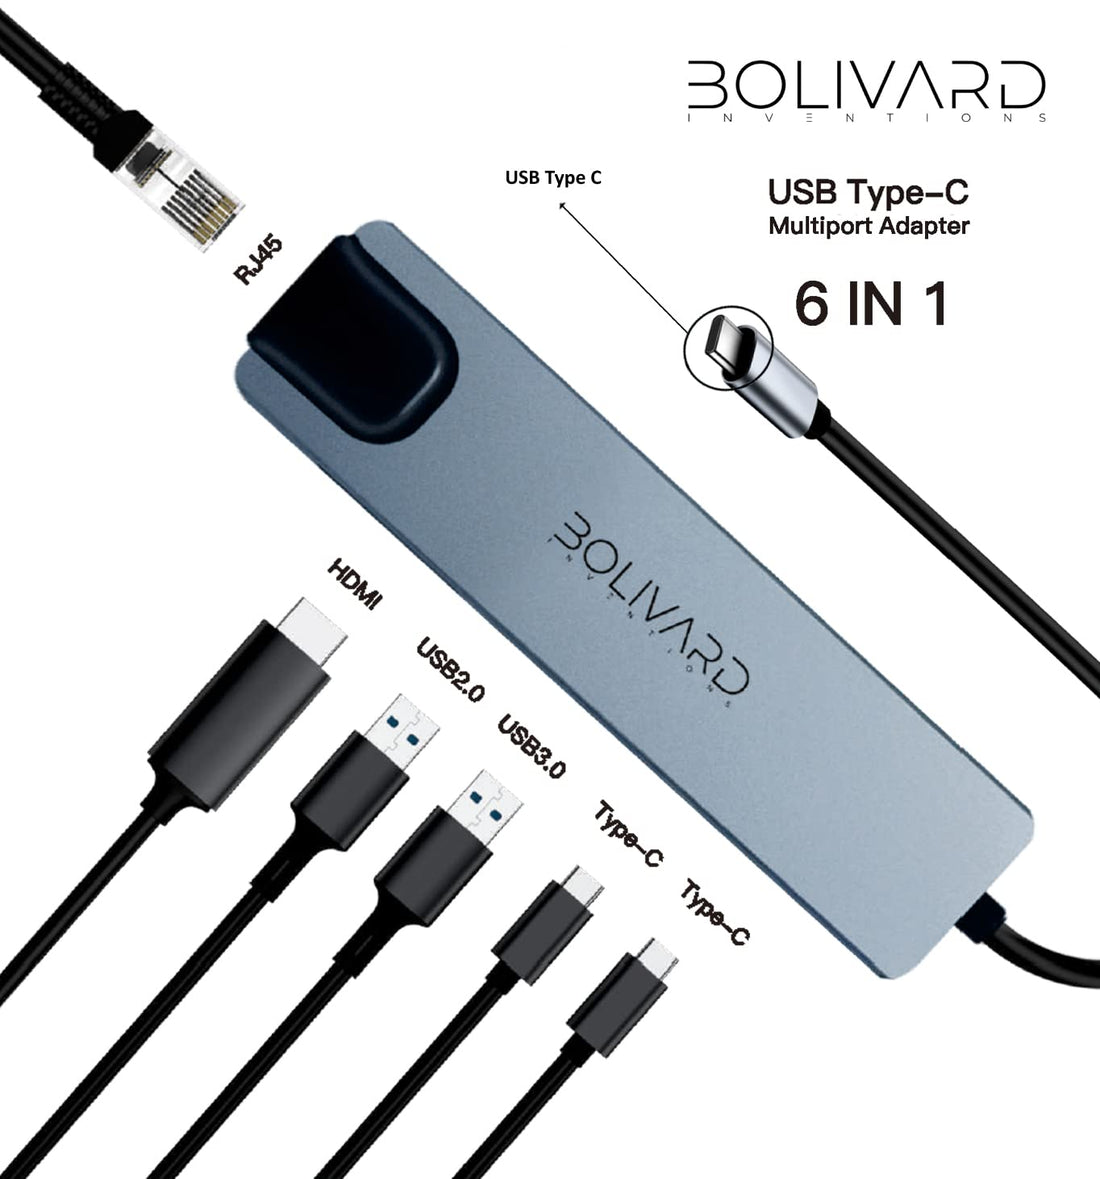 Bolivard USB Hub 6-in-1 Type C to Multiport Adapter, 4K HDMI, Ethernet Rj45 Network, USB3.0, USB-C, PD Fast Charging Compatible to Charge MacBook Air/Pro and All Devices with Type C Charging Port